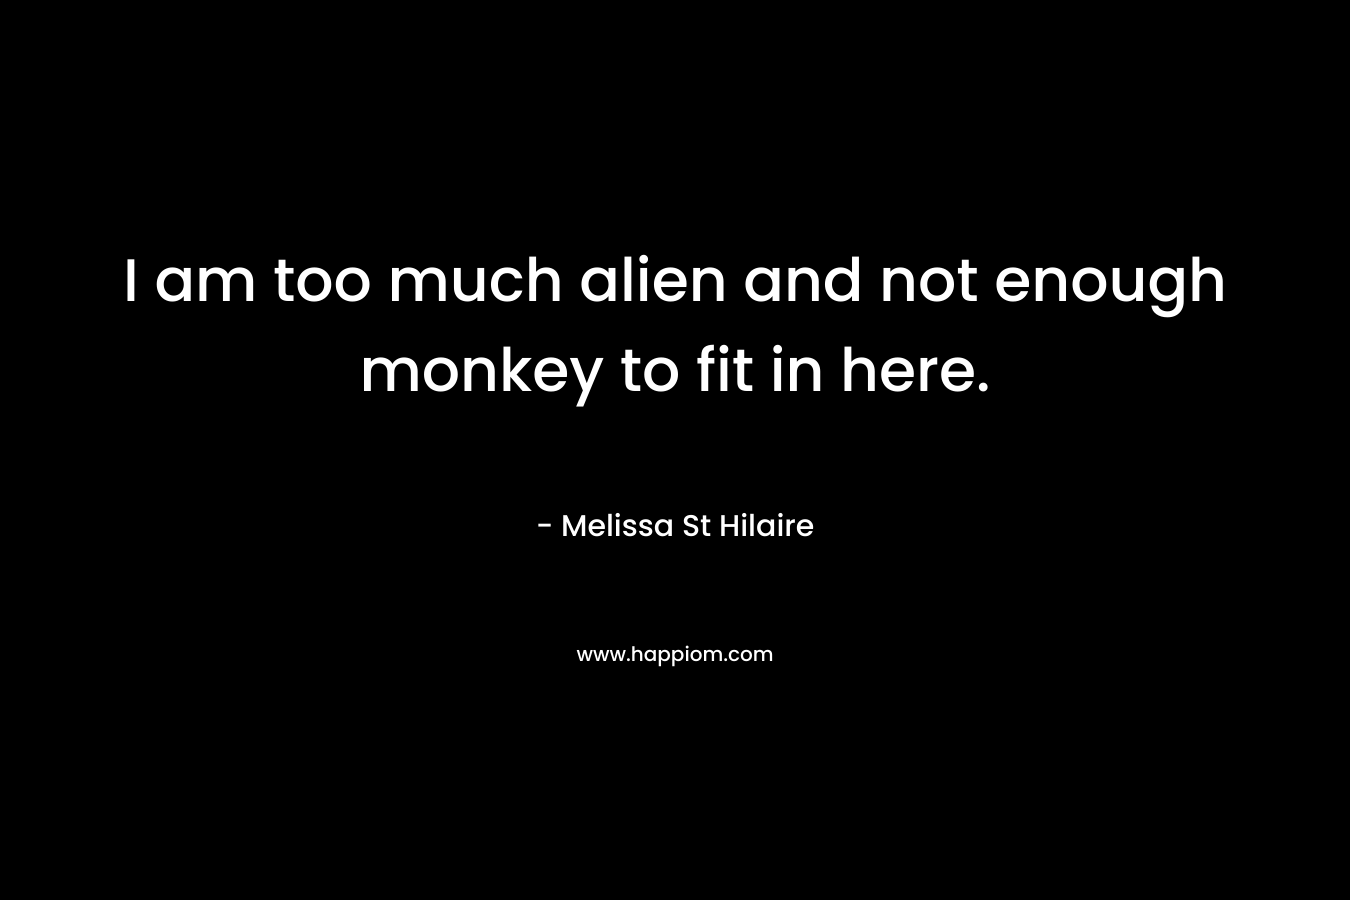 I am too much alien and not enough monkey to fit in here.